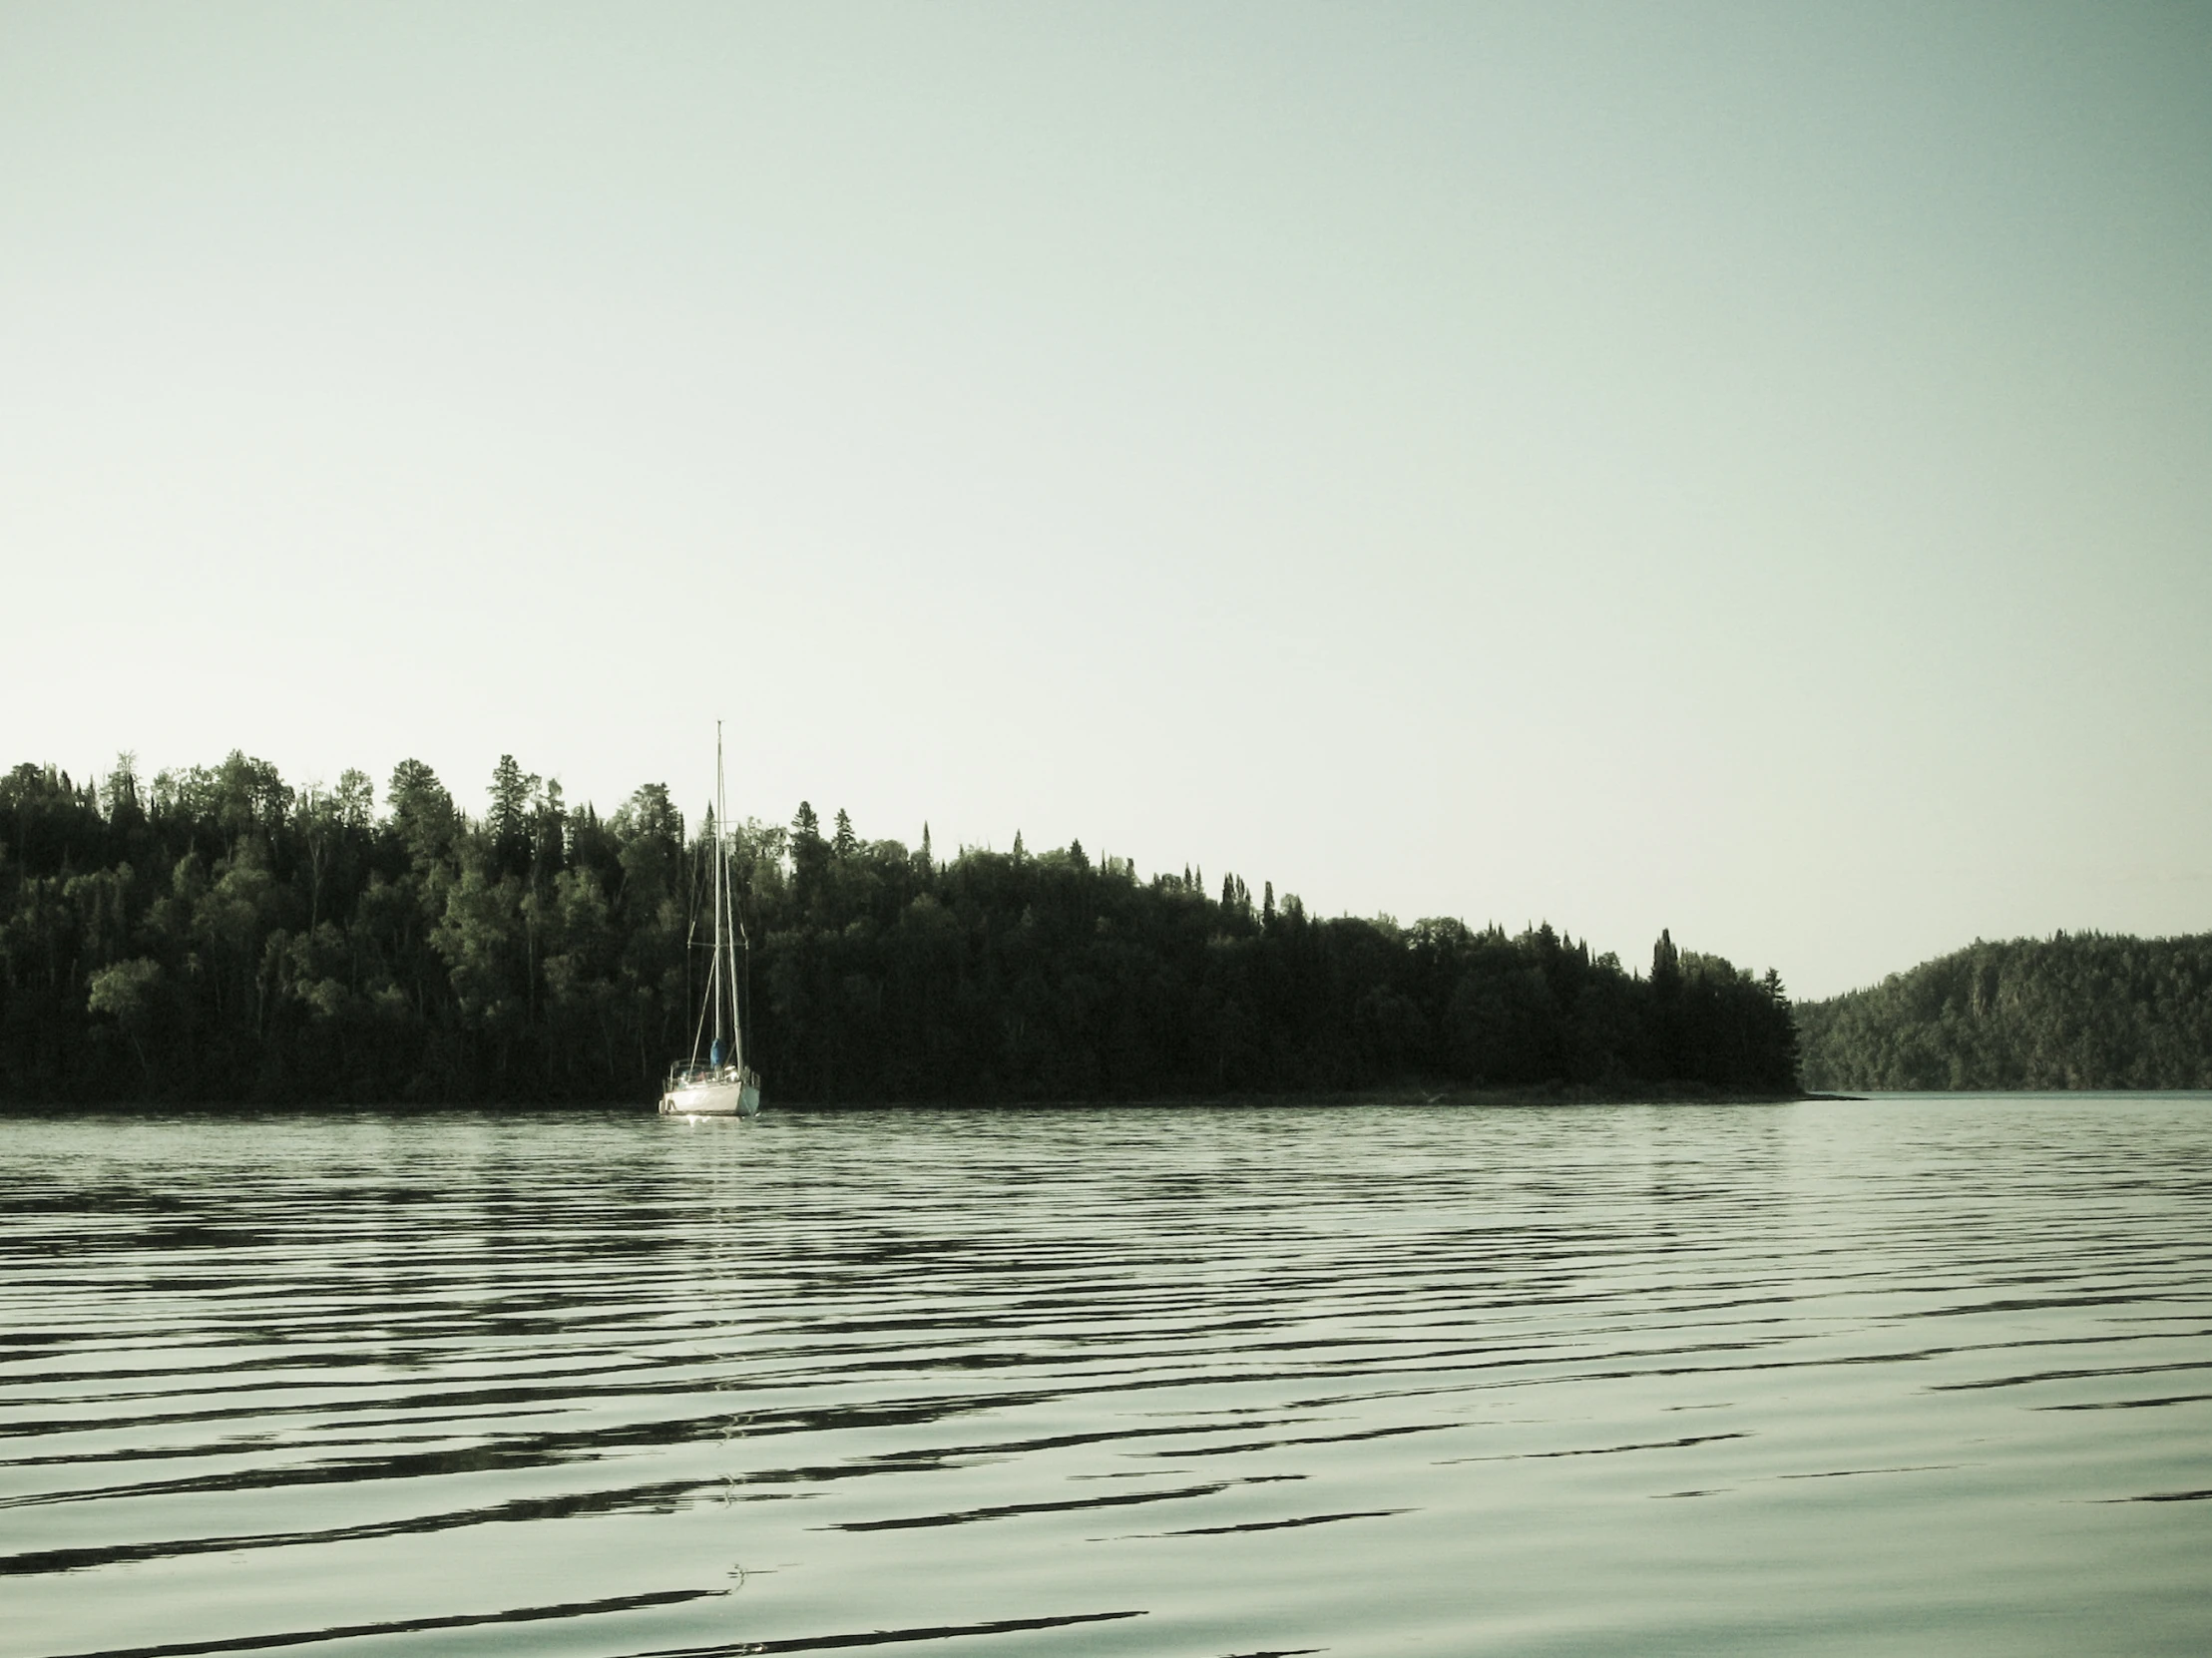 sailboat on a lake near a large island with trees